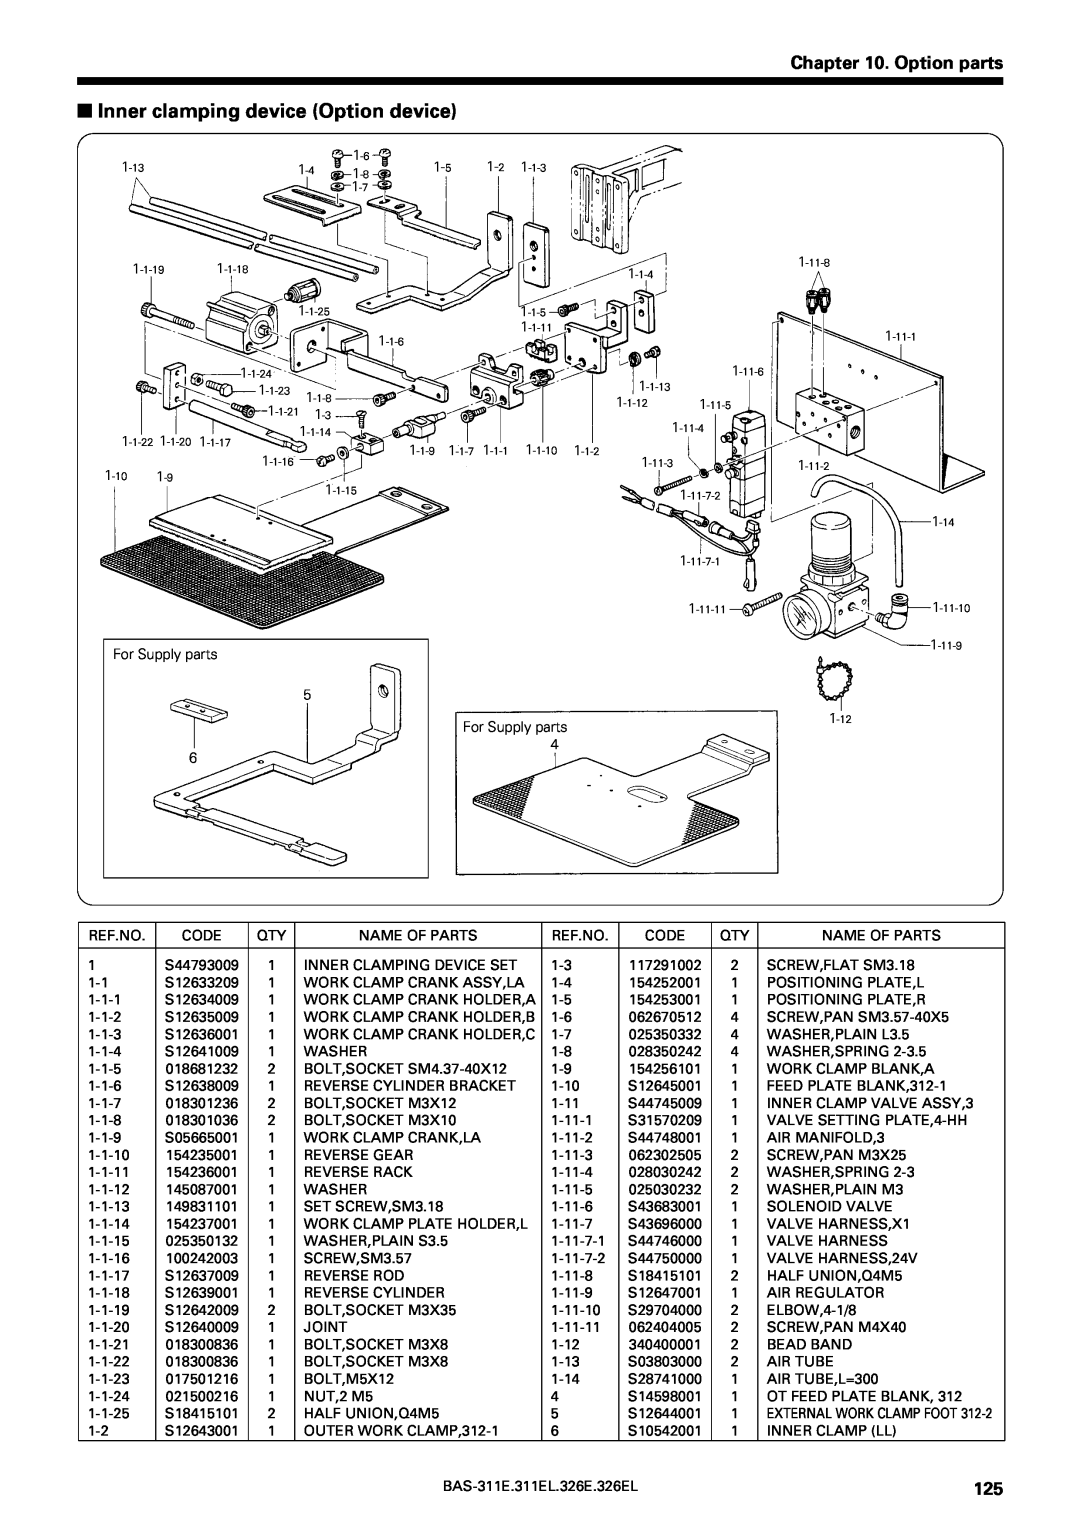 Brother BAS-311E service manual Inner clamping device Option device, Option parts 